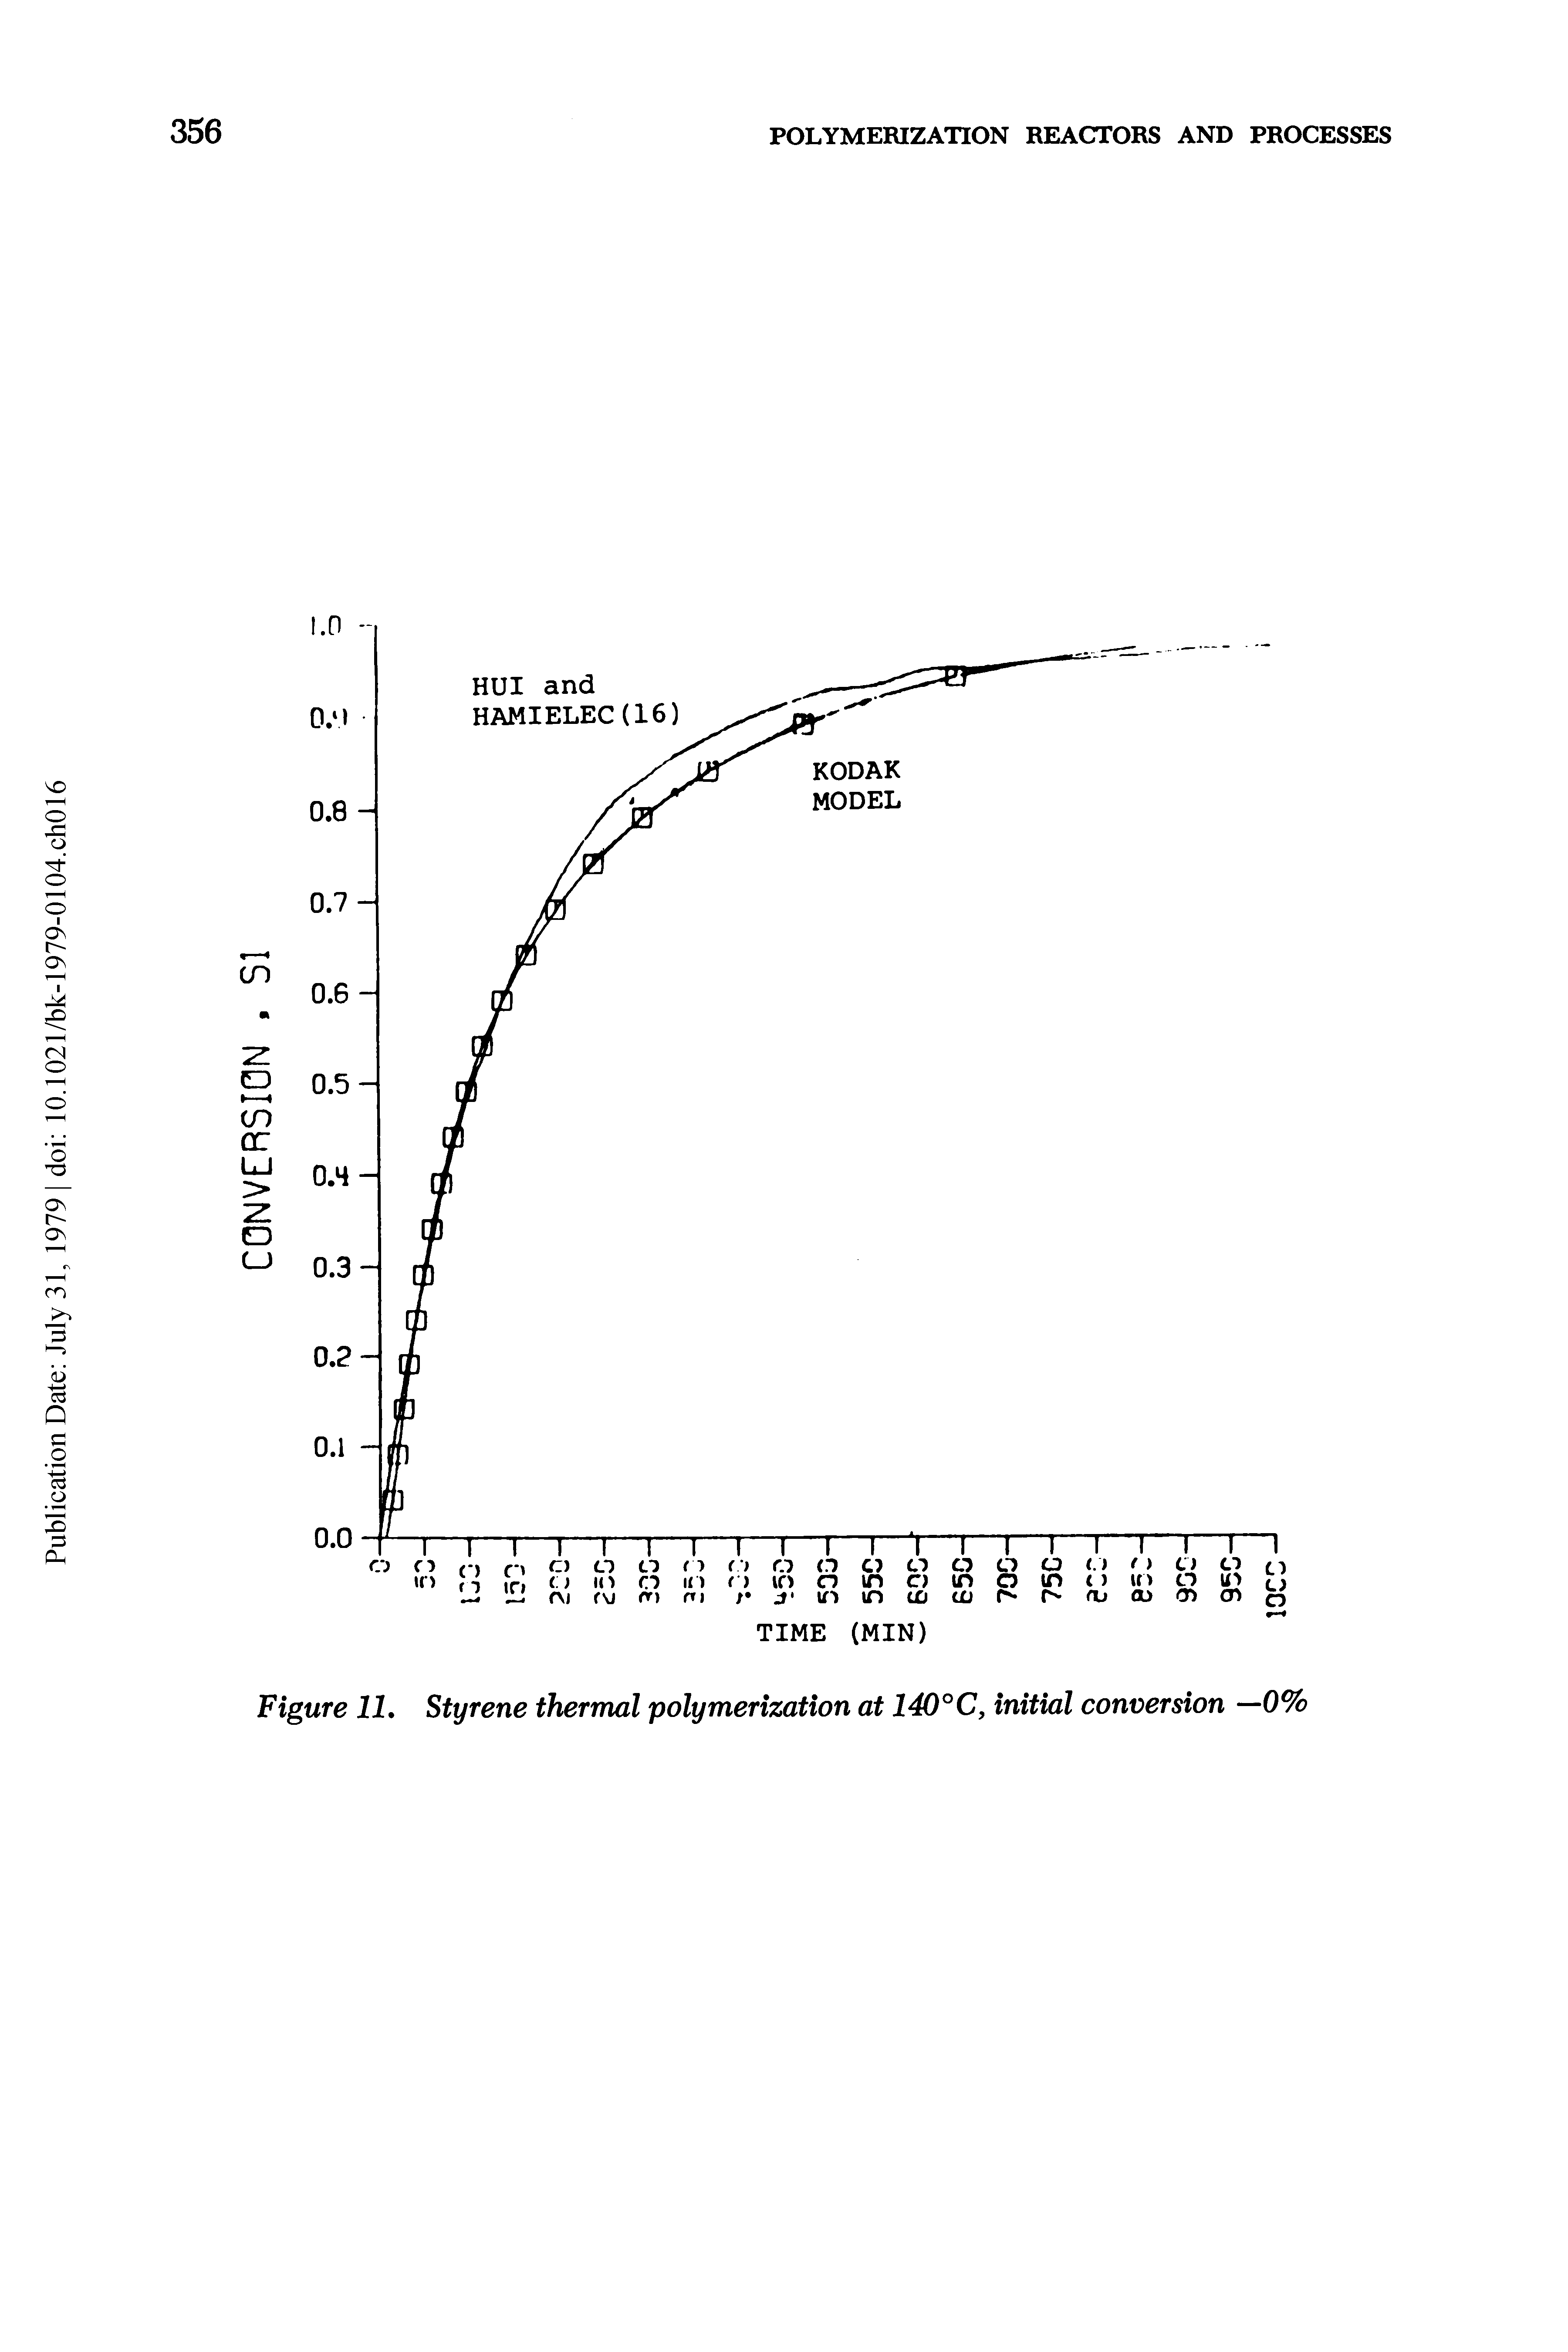 Figure 11, Styrene thermal polymerization at 140°C, initial conversion —0%...